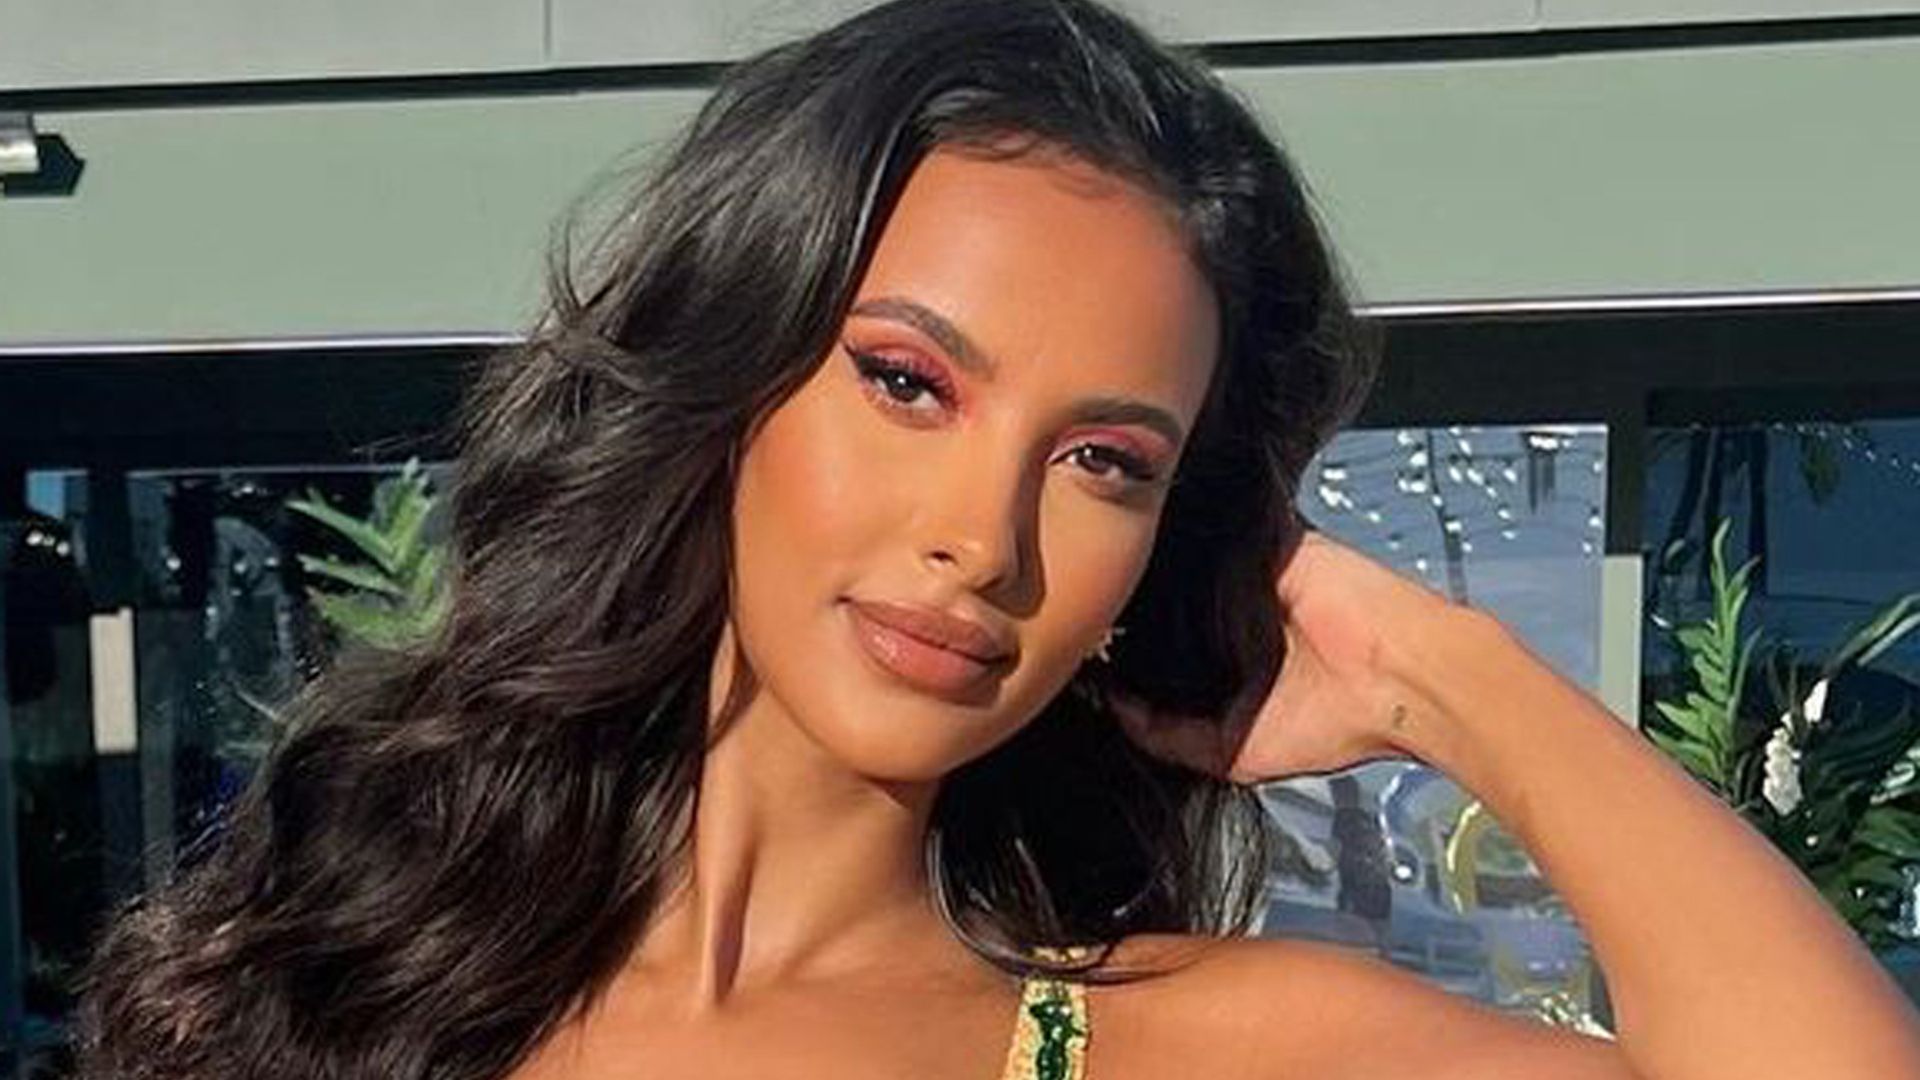 Maya Jama poses for photo as the sun shines on her face